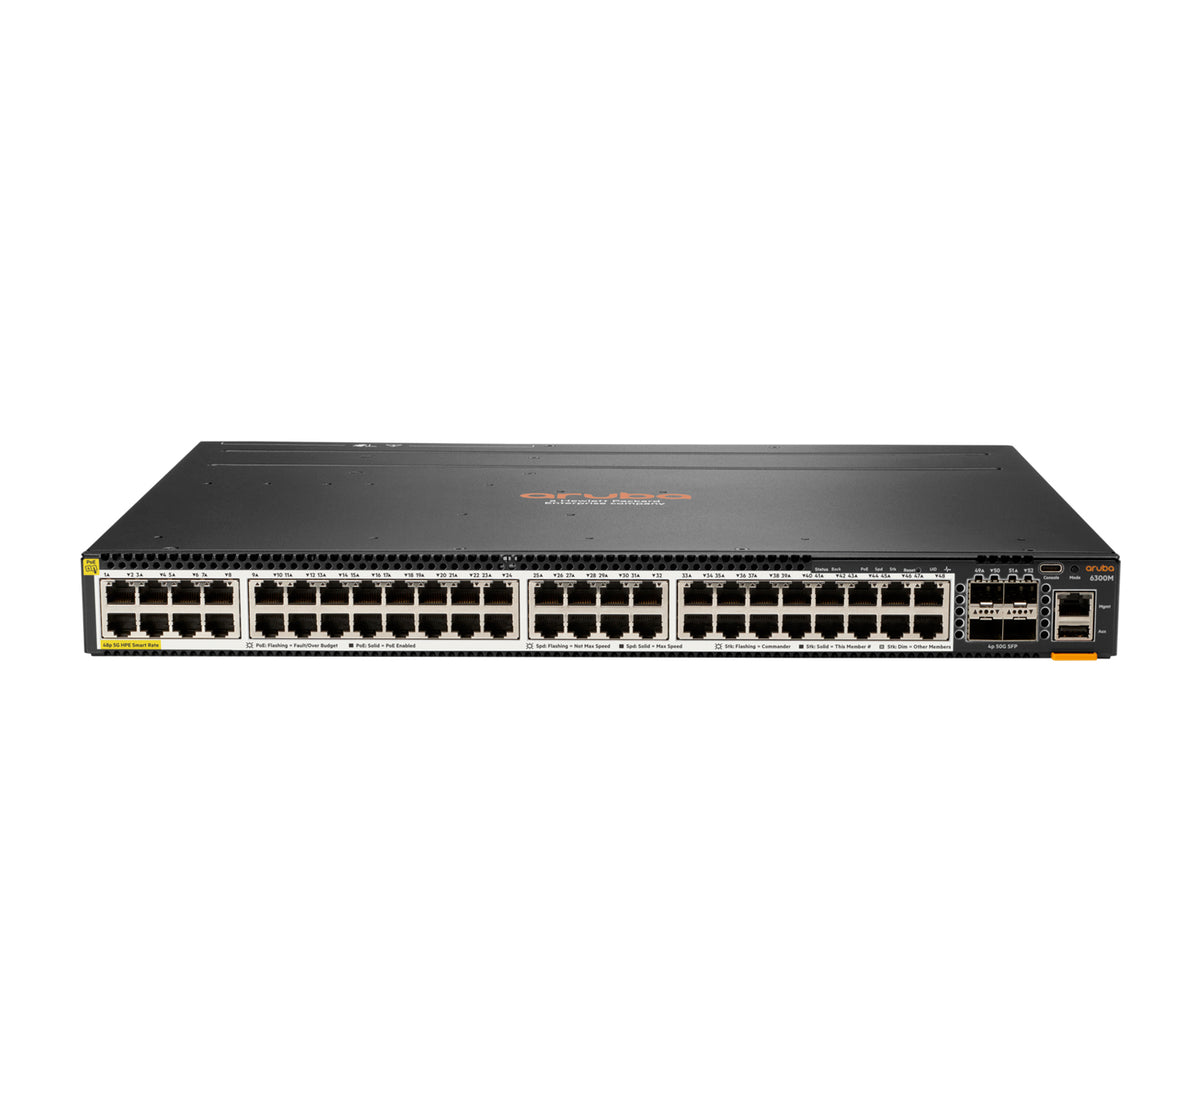 HPE Aruba 6300M ​​- Switch - L3 - Managed - 48 x 100/1000/2.5G/5G (PoE+) + 4 x 1 Gigabit / 10 Gigabit / 25 Gigabit / 50 Gigabit SFP56 (uplink / stacking) - front and side to back - rail mountable - PoE+ (2880 W)